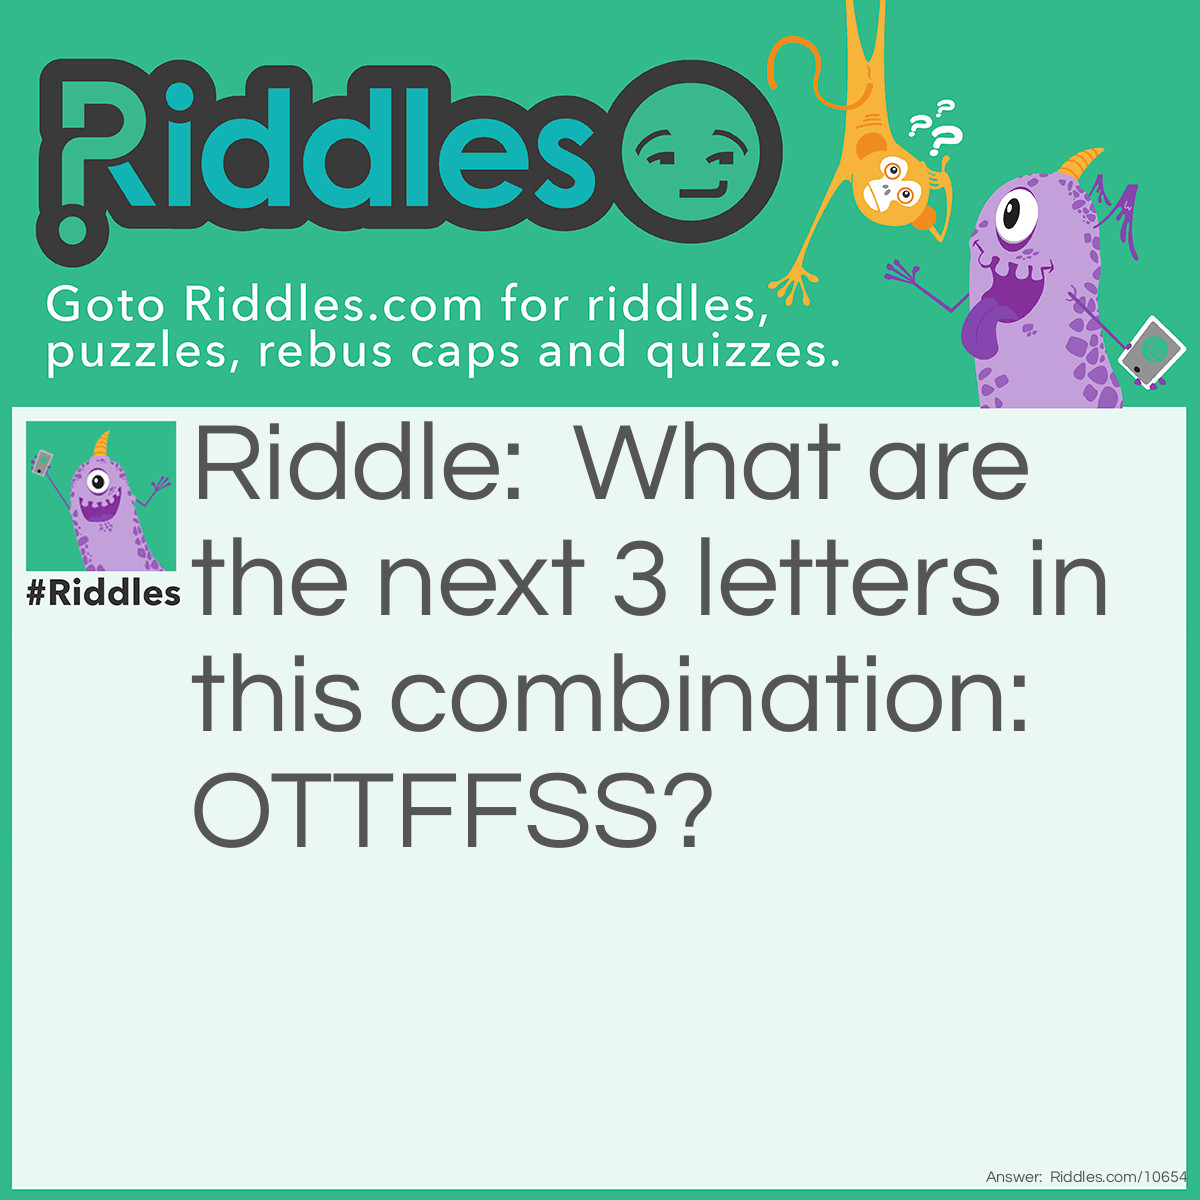 Riddle: What are the next 3 letters in this combination: OTTFFSS? Answer: ENT. 